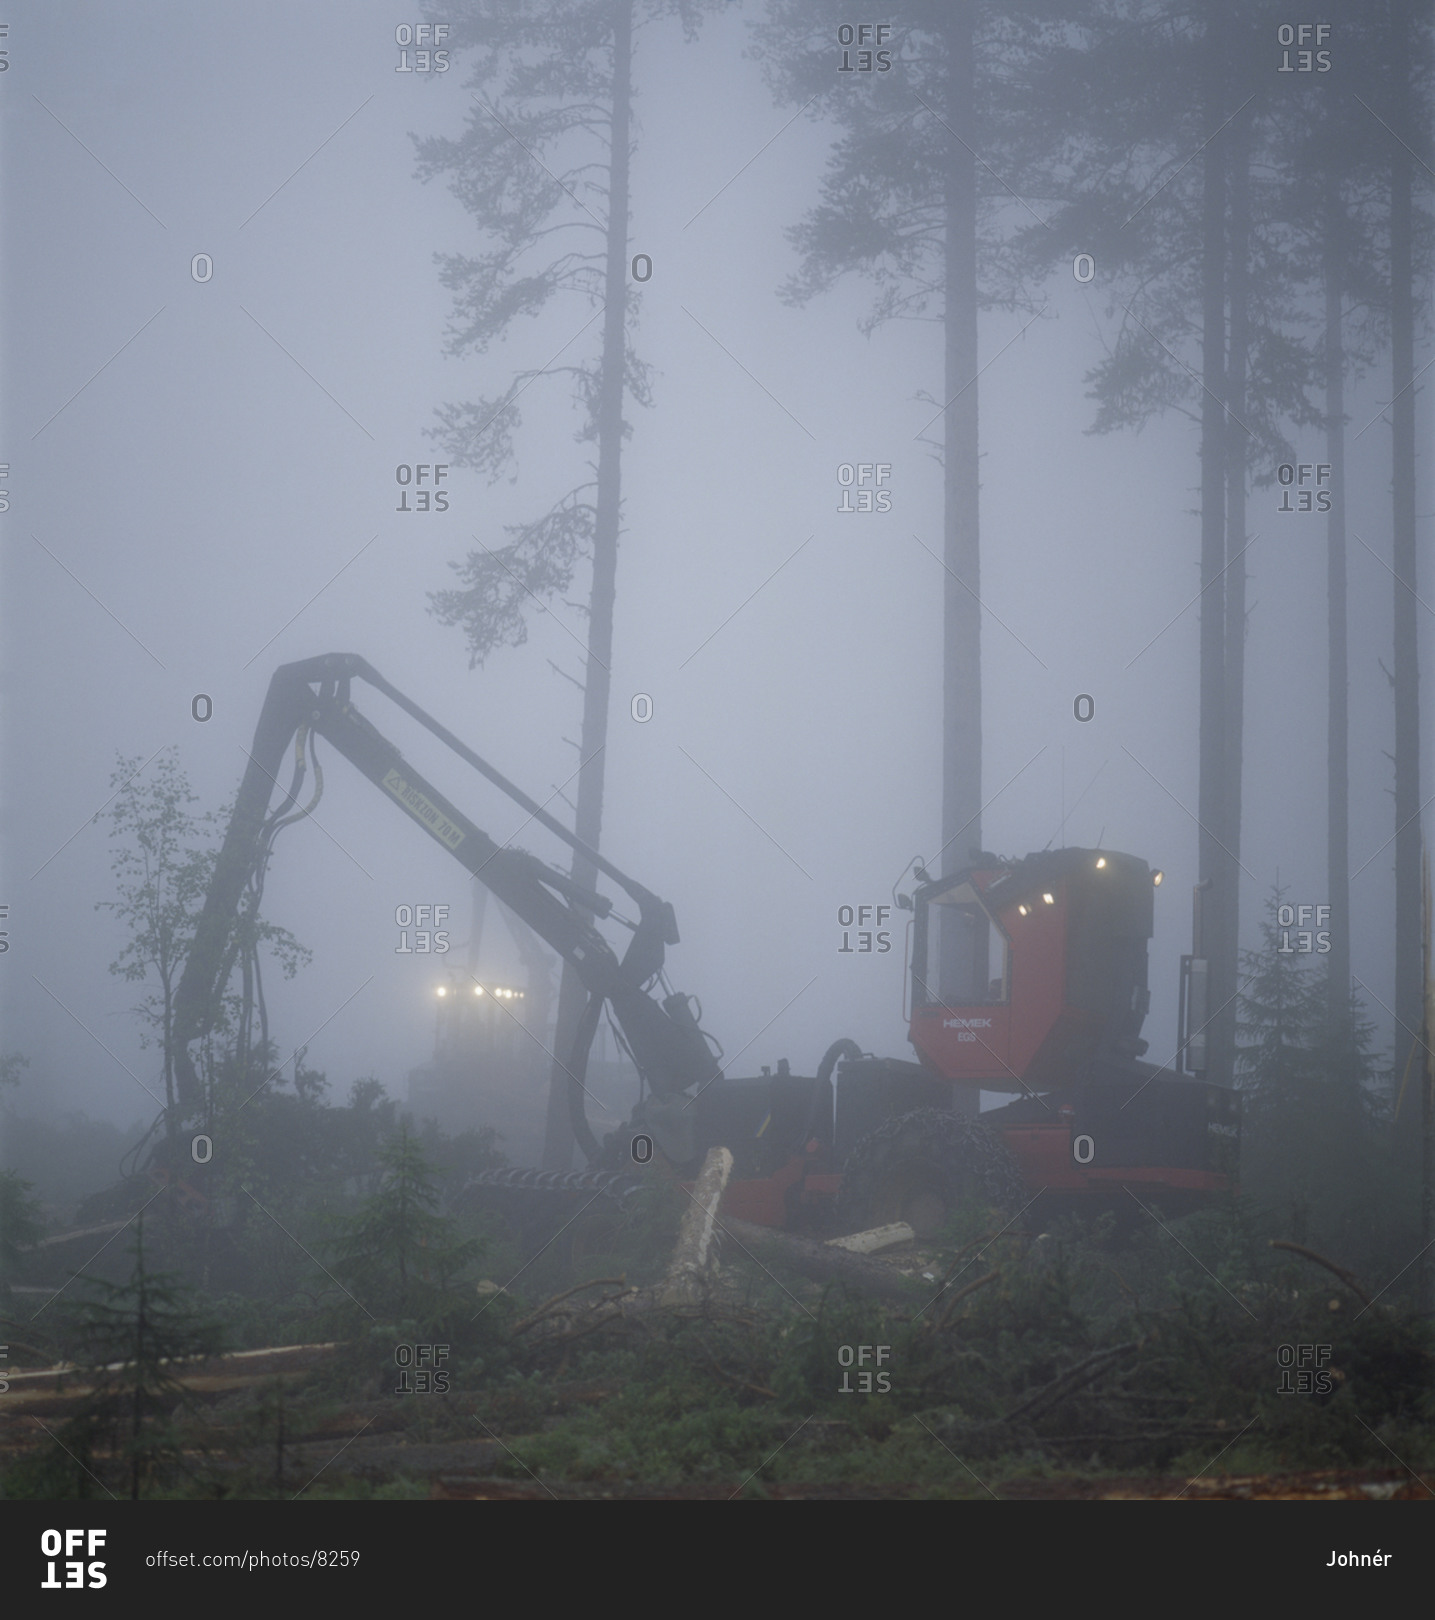 Crane in foggy forest